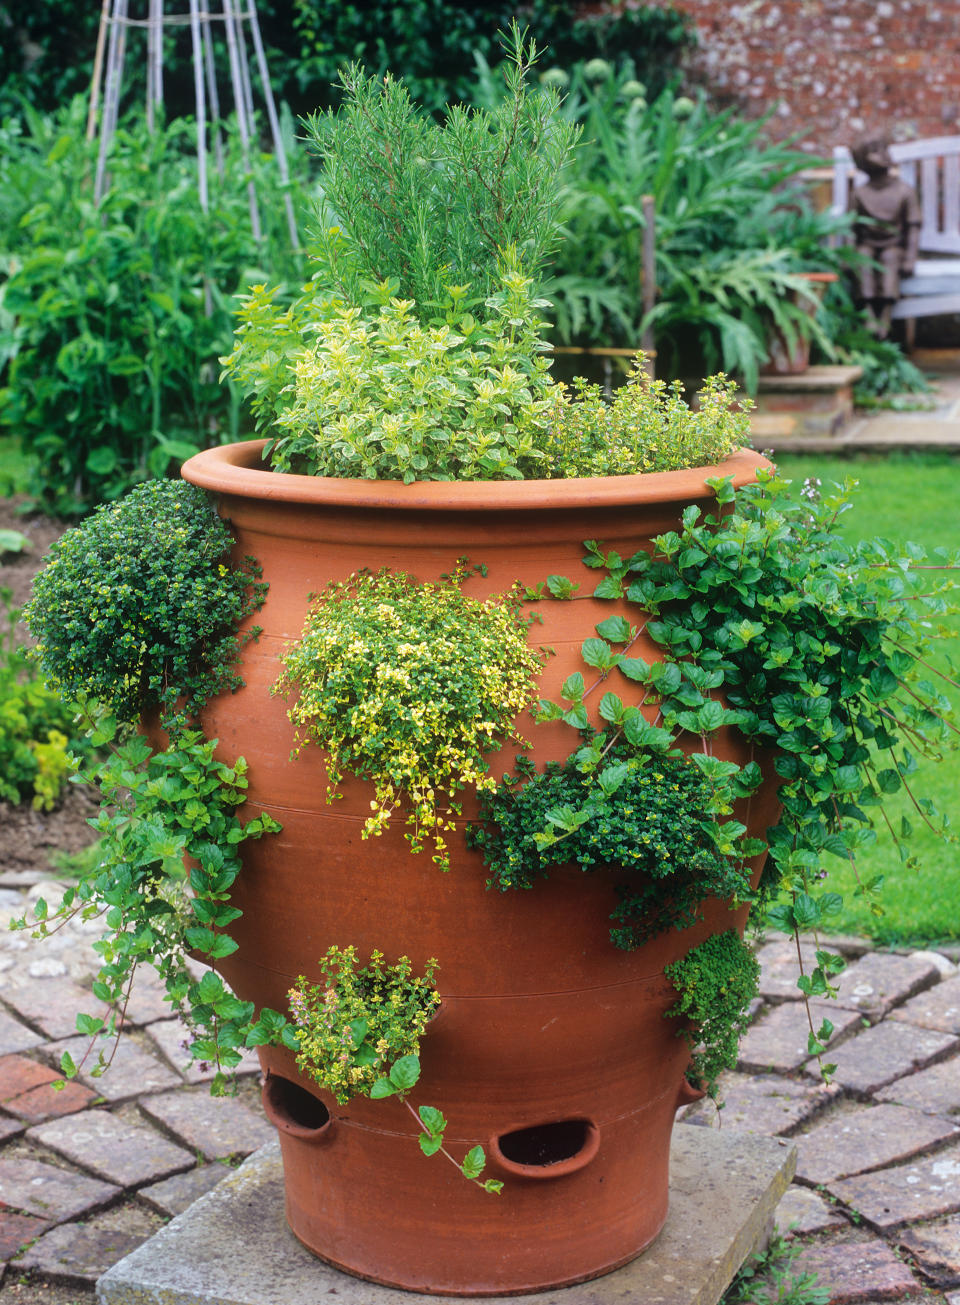 <p> If you&#x2019;re short on garden space, perhaps only with a small courtyard or even just a doorstep, you can create a complete herb garden in a single planter. </p> <p> Terracotta herb planters have various holes that allow you to plant different herbs in separate sections of the same pot.&#xA0; </p> <p> Terracotta is a great choice for this type of pot as it is porous, meaning it lets air and water circulate, preventing root rot and soil disease, and keeping your herbs healthy. </p> <p> Happily there are many container gardening that will enable you to create a lush oasis in the smallest of spaces. </p> <p> When it comes to potting up your herbs, Jekka McVicar of Jekka&apos;s advises potting up a plant one pot-size at a time. &apos;Going from a 1ltr pot to a 10ltr pot in one go will stress the plant and can quite often kill it,&apos; she says. </p>